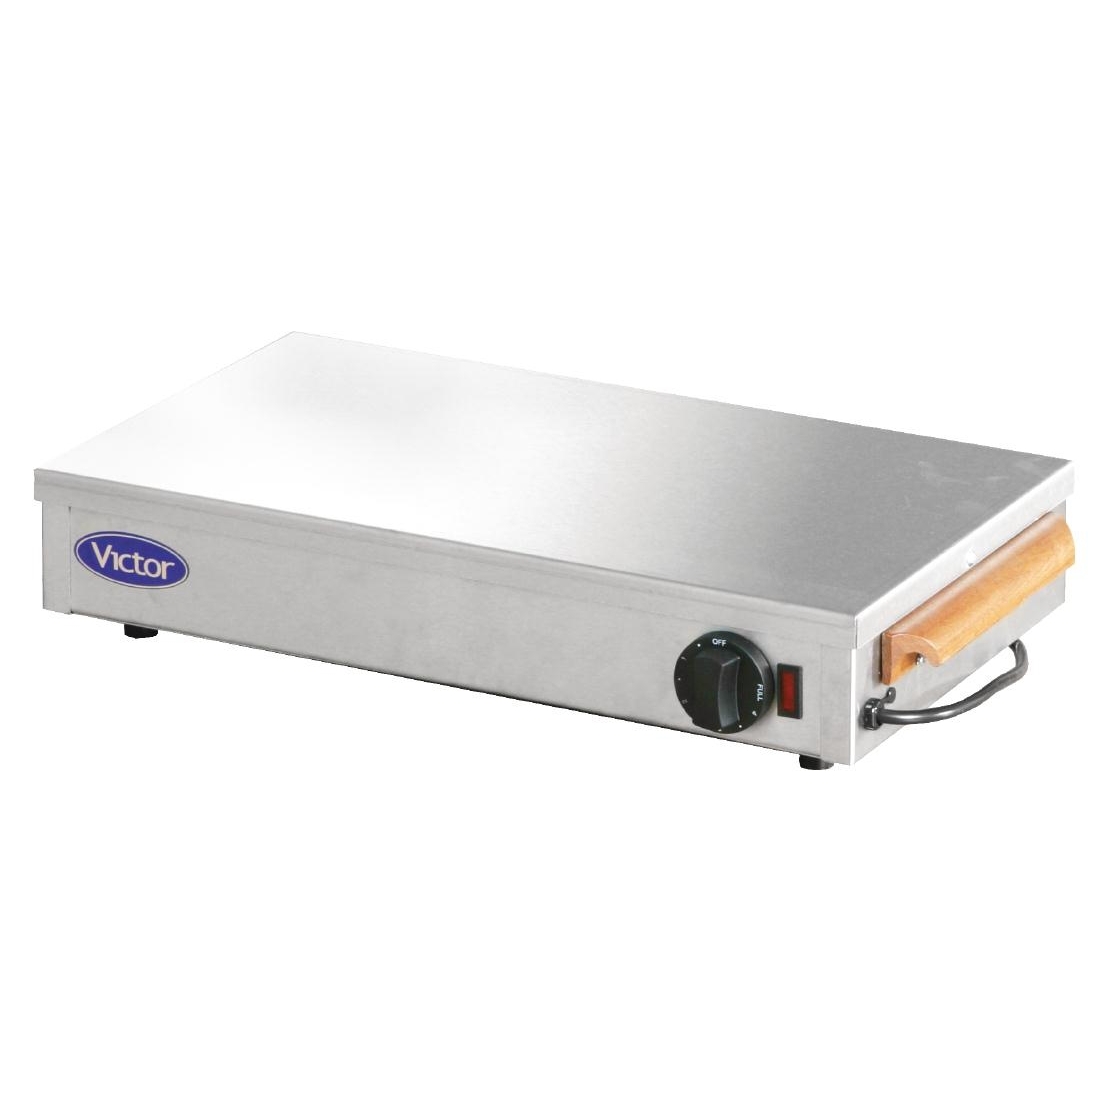 Victor Hot Plate HP1